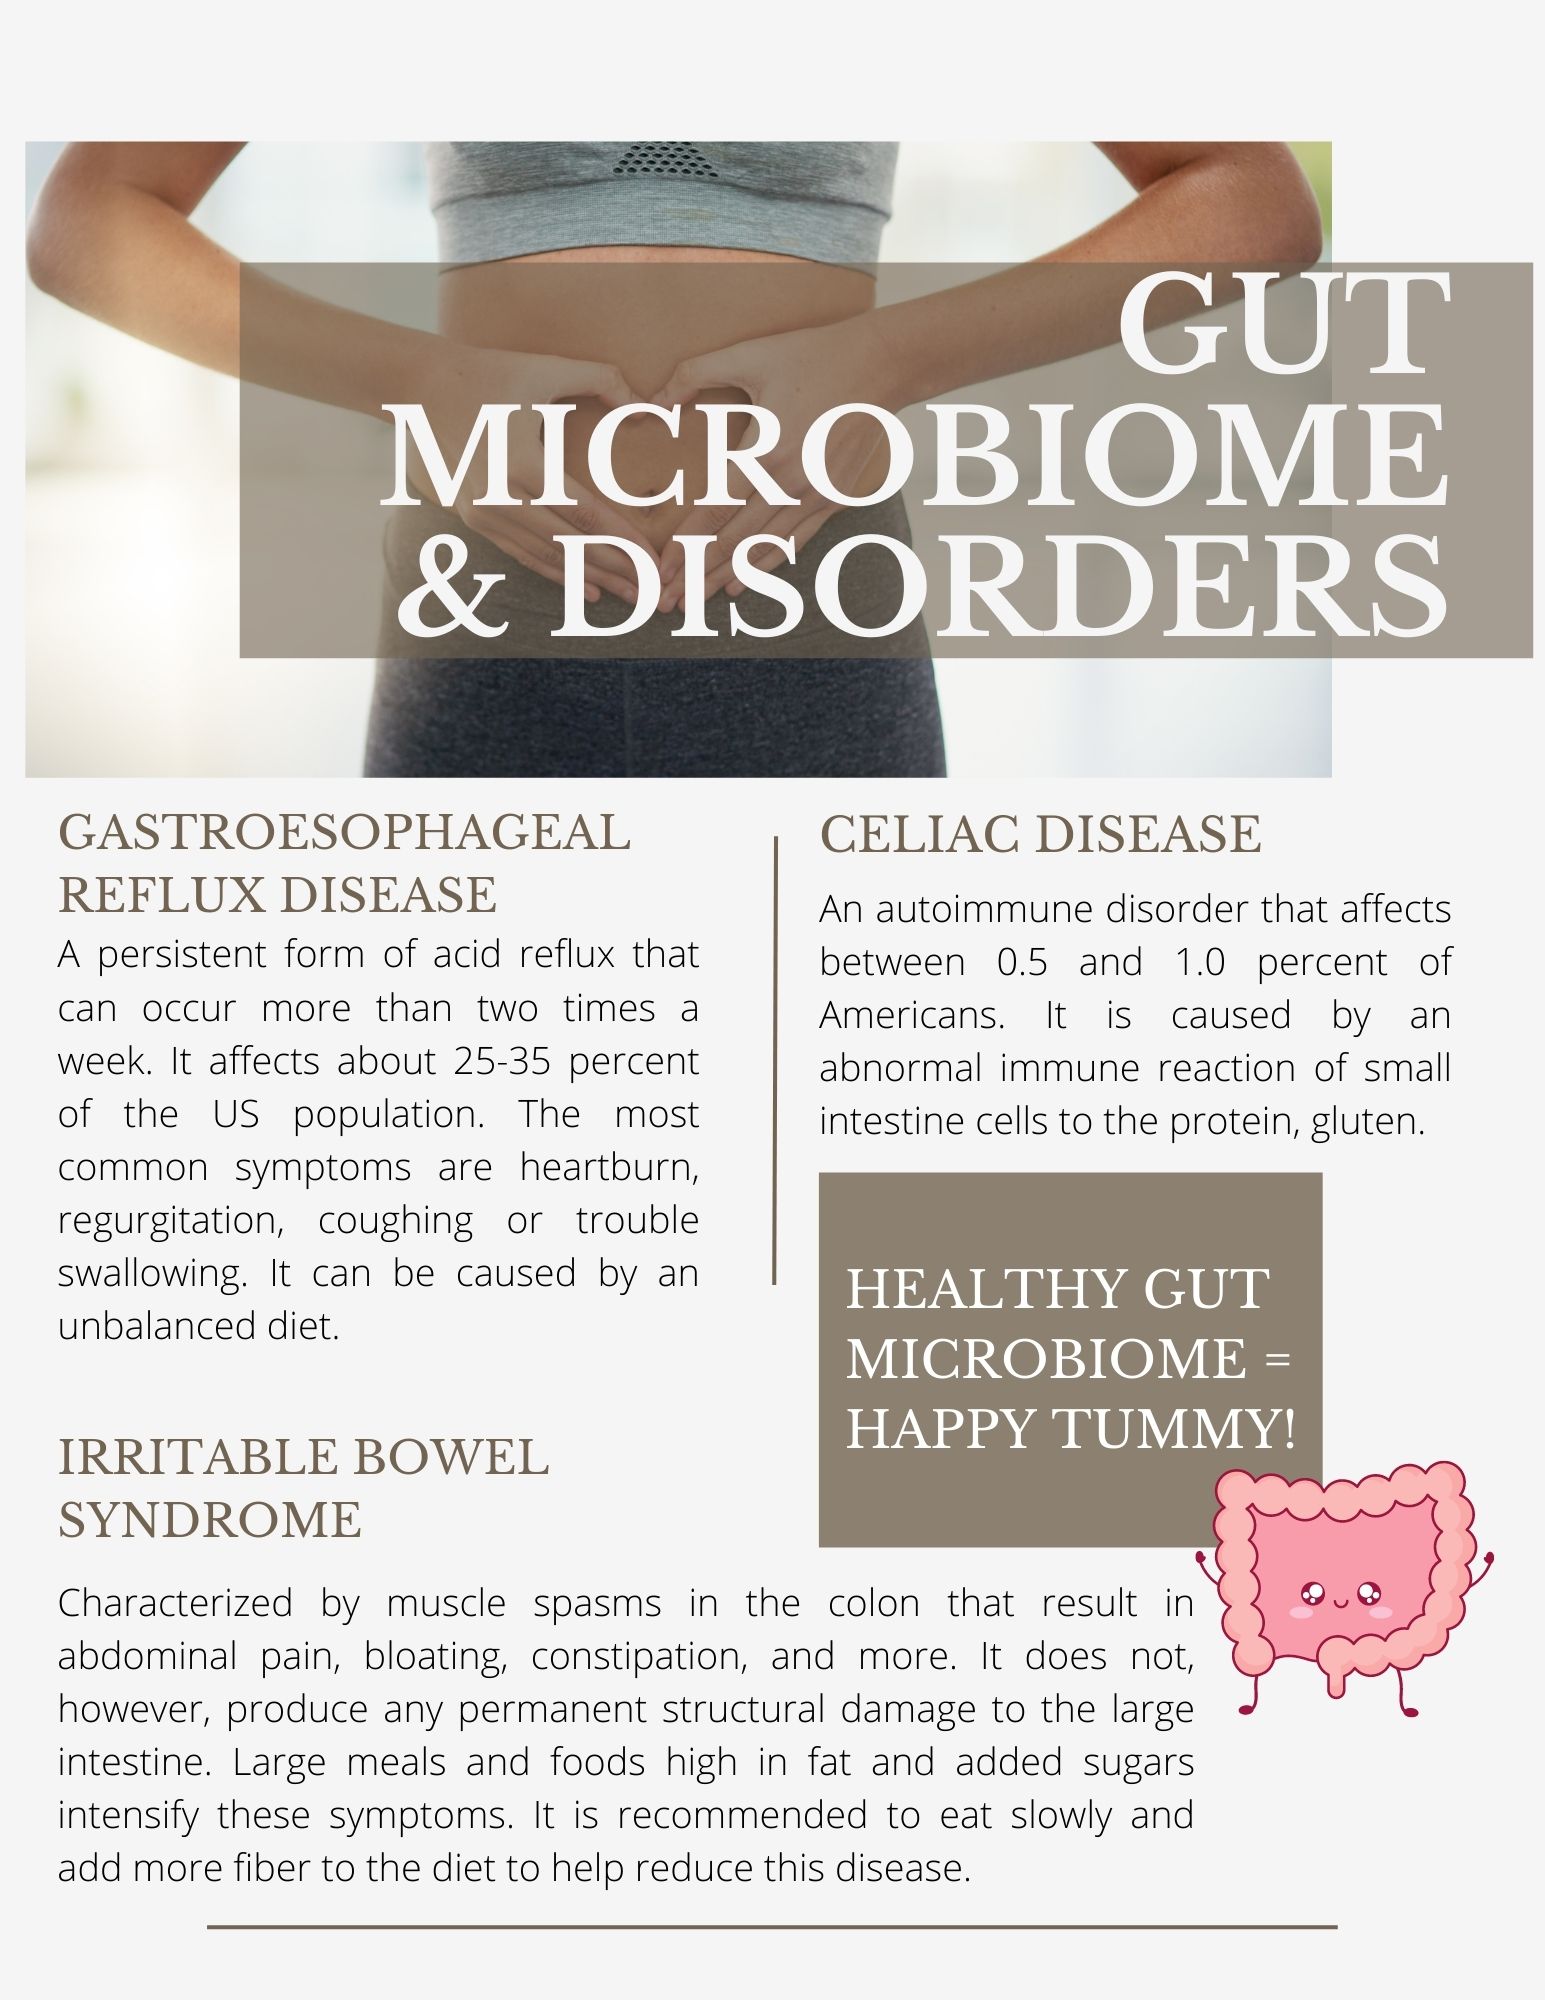 Infographic summarizing disorders of the gut